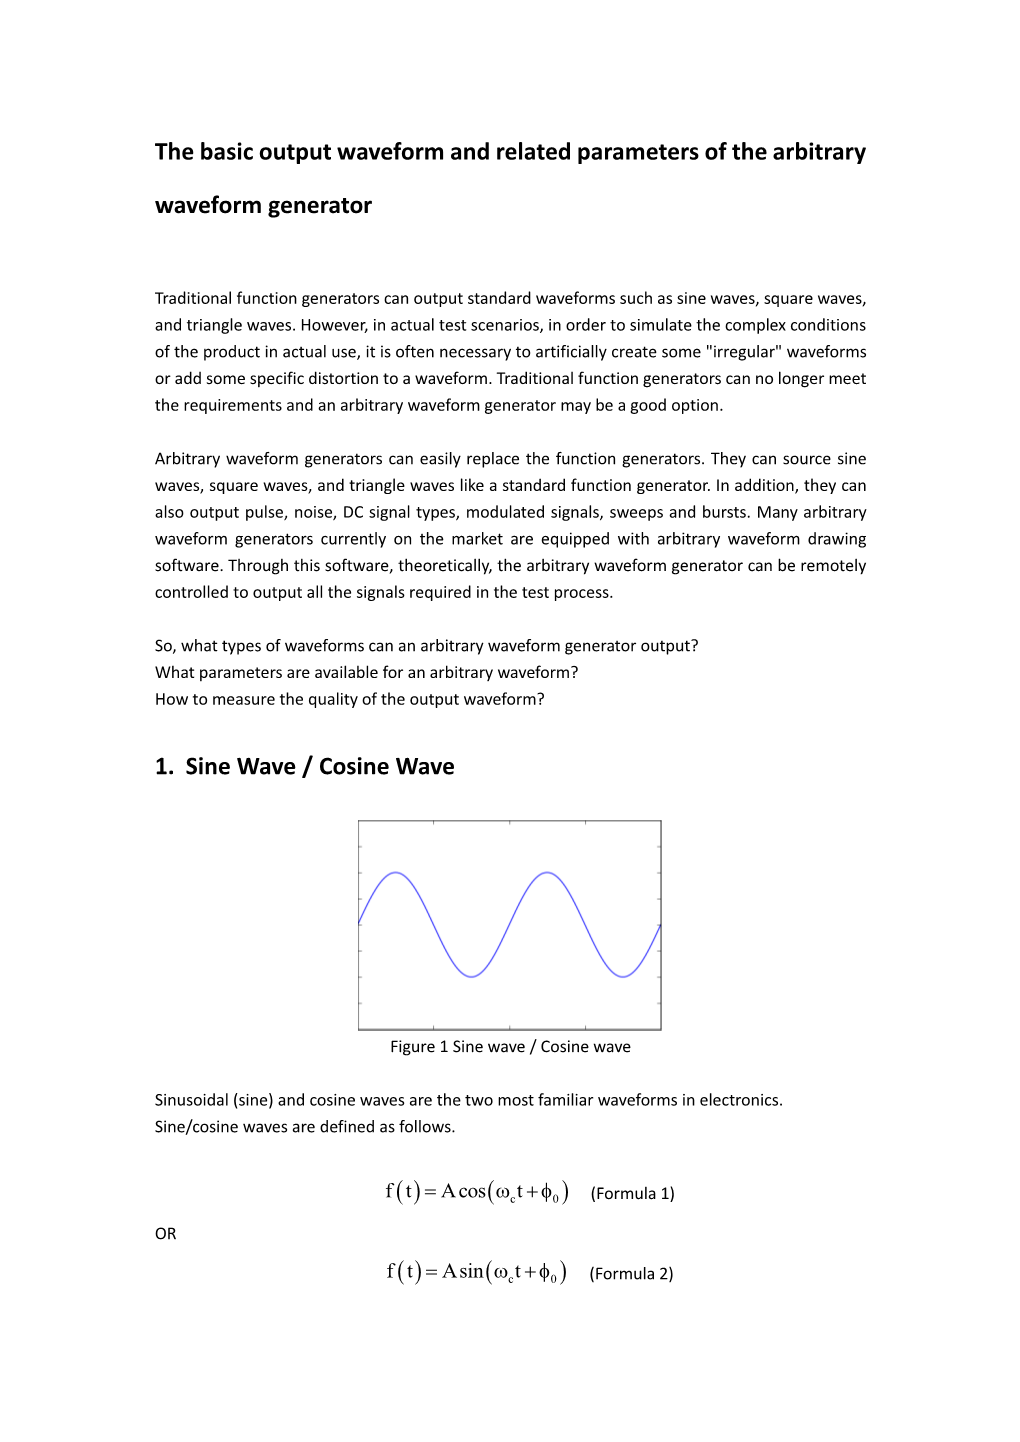 The Basic Output Waveform and Related Parameters of the Arbitrary Waveform Generator